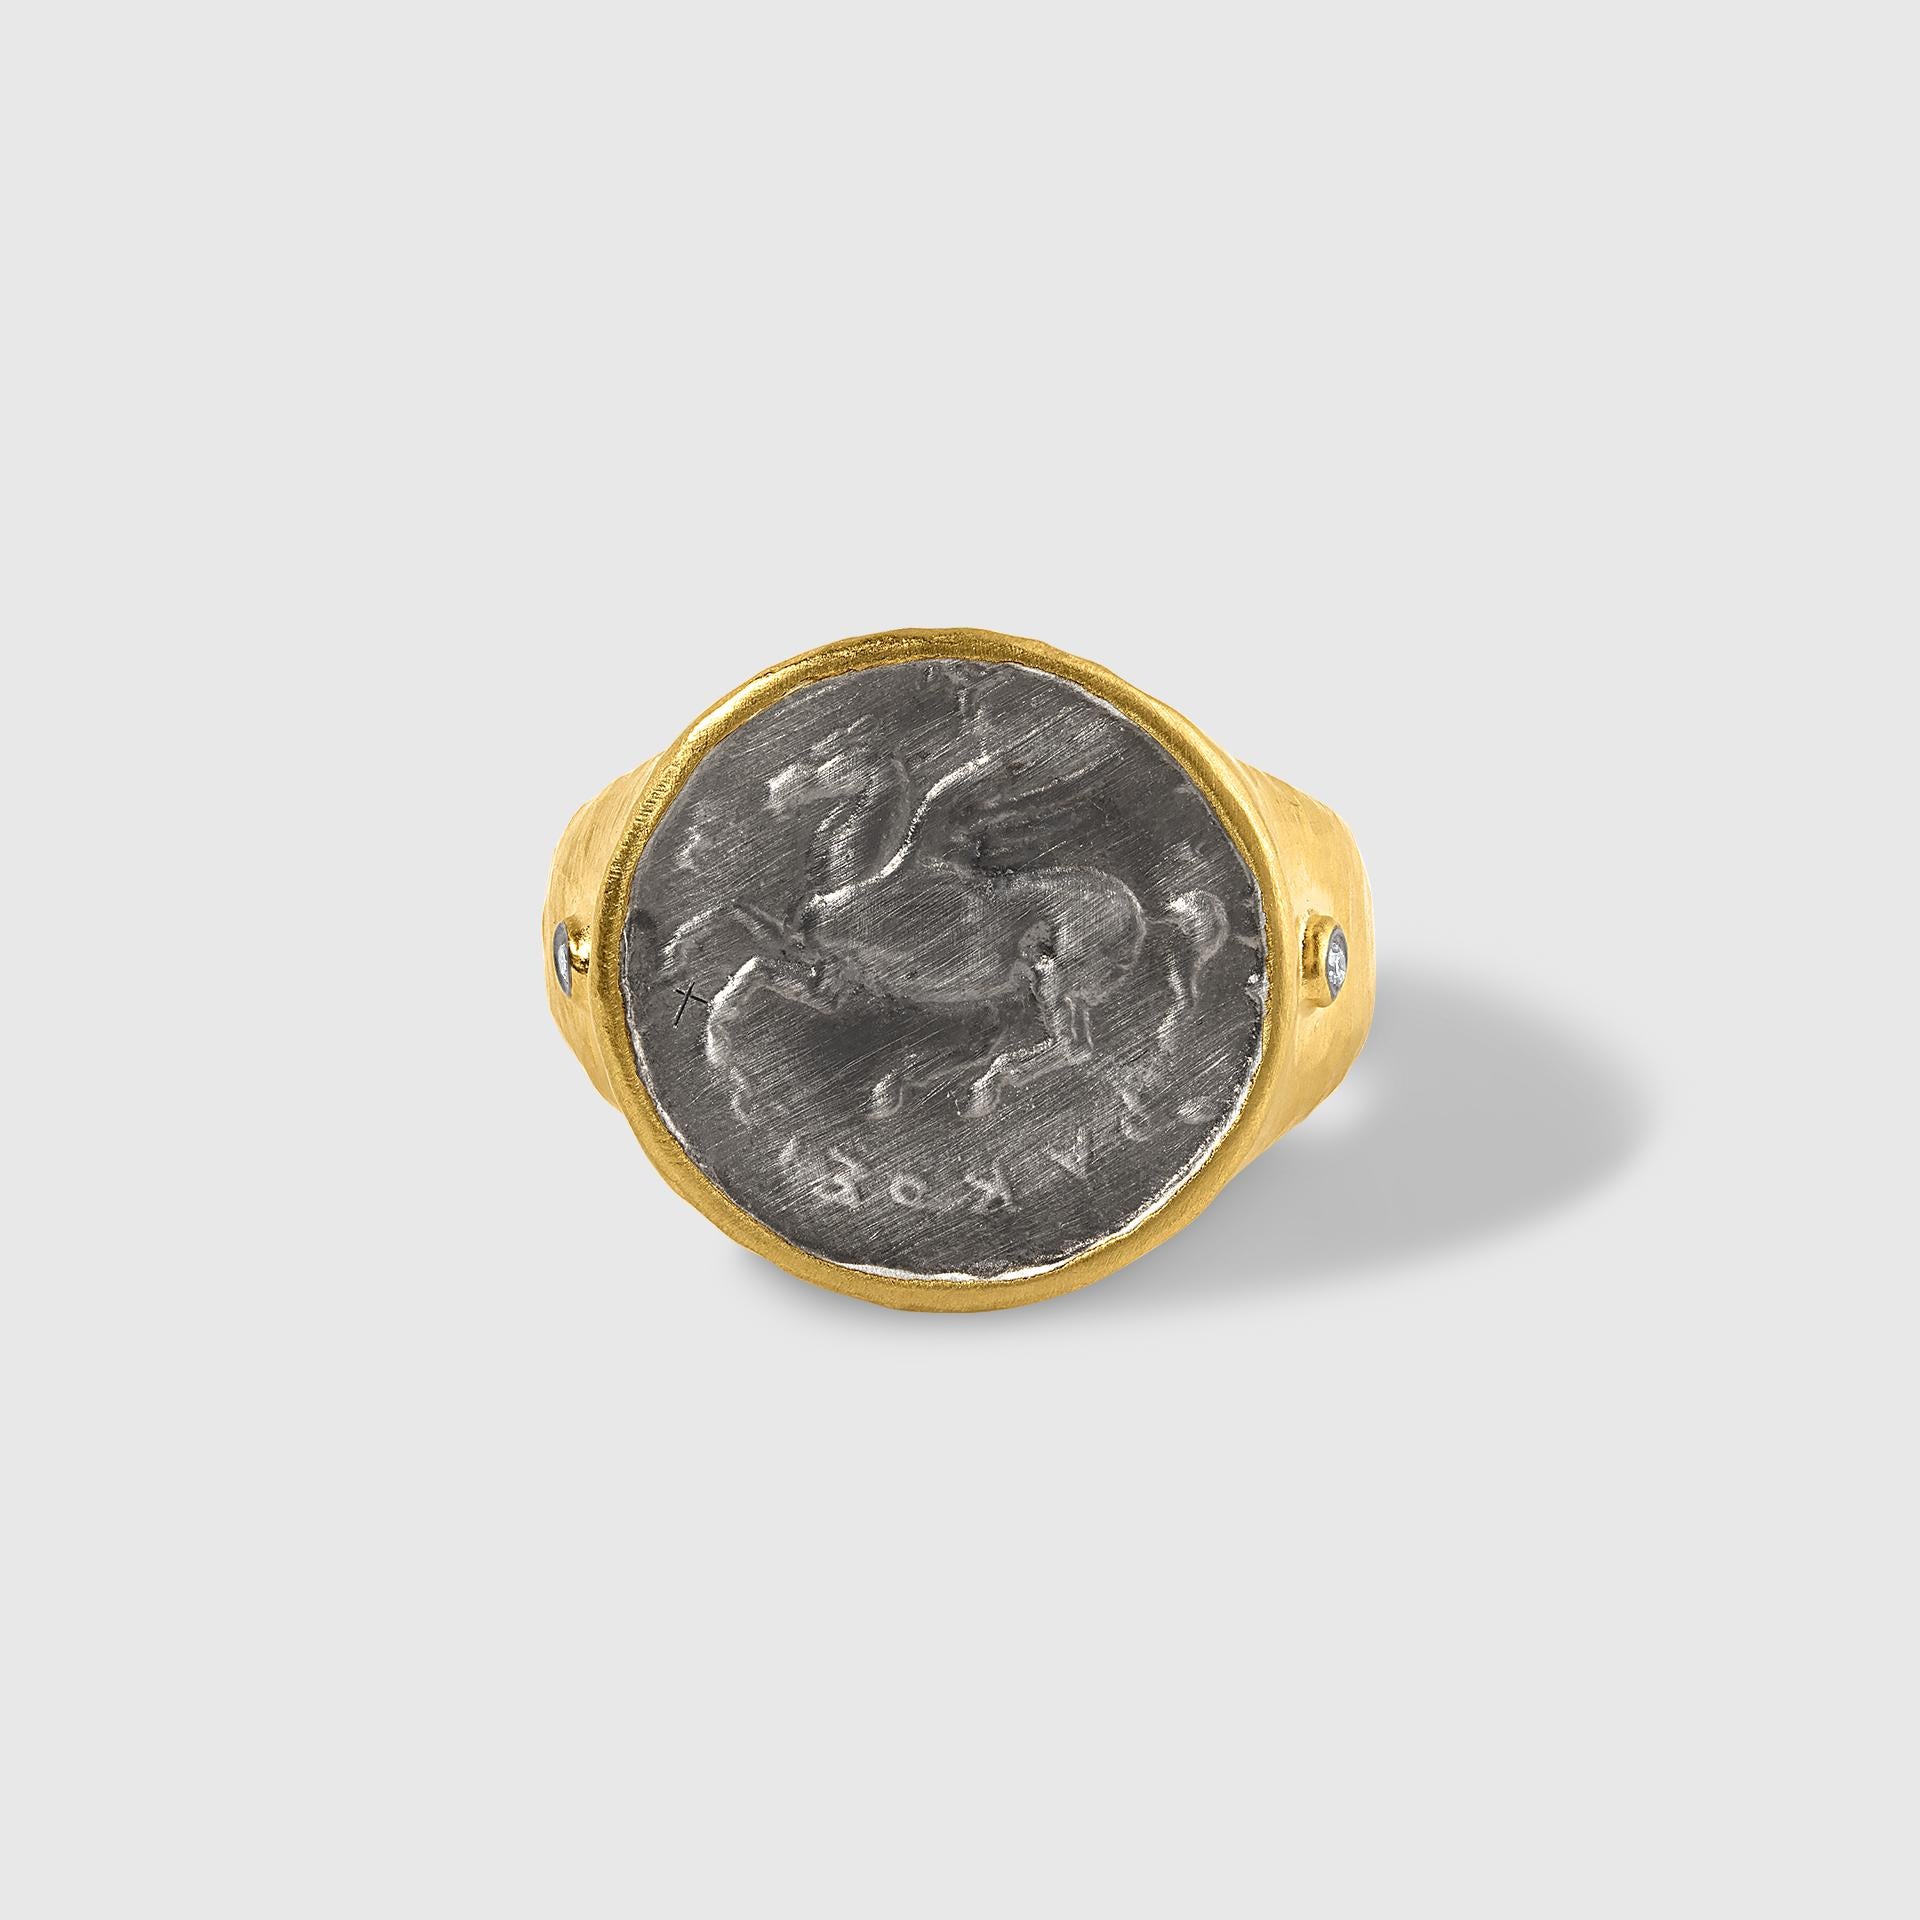 Pegasus Coin Ring with Diamonds, 24kt Gold and Silver, Kurtulan 24kt gold-fused on sterling silver. Size 7 is in stock. Diamonds: 0.02ct.

Made-to-order custom ring sizes take approximately 4-6 weeks for production and shipping.

About